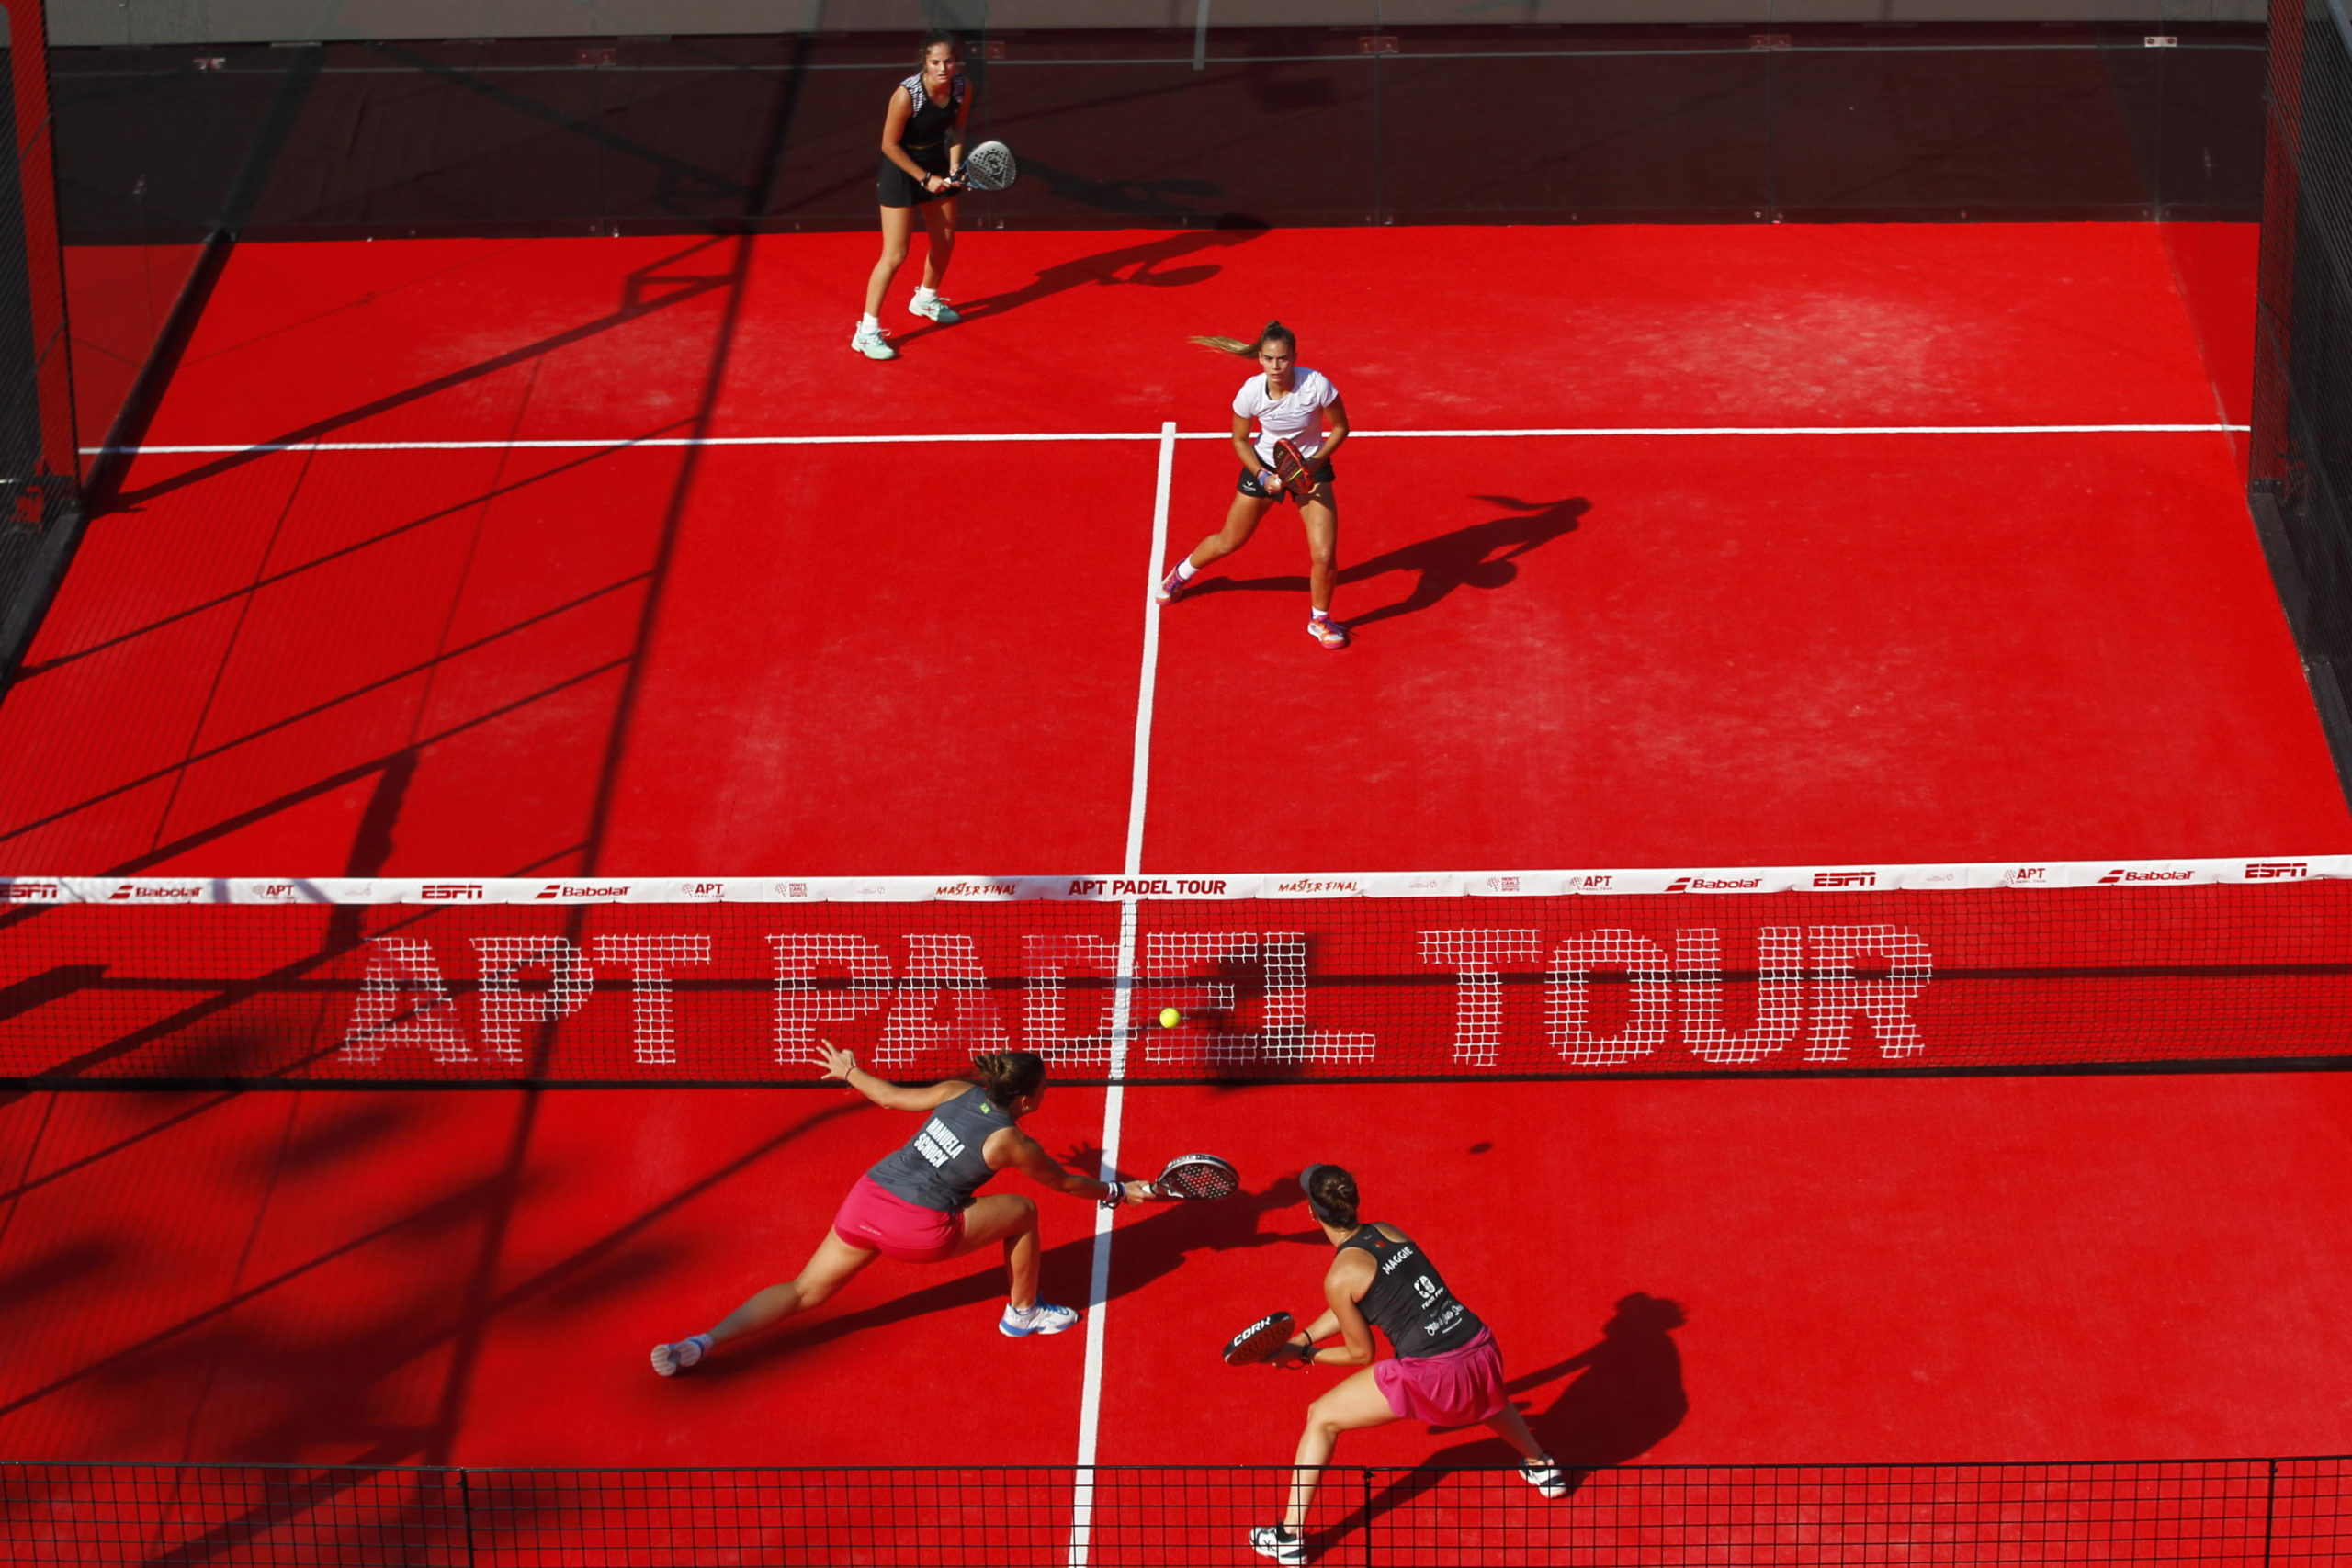 epa10358472 Spain's Marta Borrero (top L) and Patricia Martinez (top R) in action against Brazil's Manuela Schuck (bottom L) and Portugal's Margarida Fernandes (bottom R) during a doubles match for the APT Padel Tour Master Final tournament, in the Panamerican Tennis Center, in Guadalajara, Mexico, 09 December 2022.  EPA/Francisco Guasco